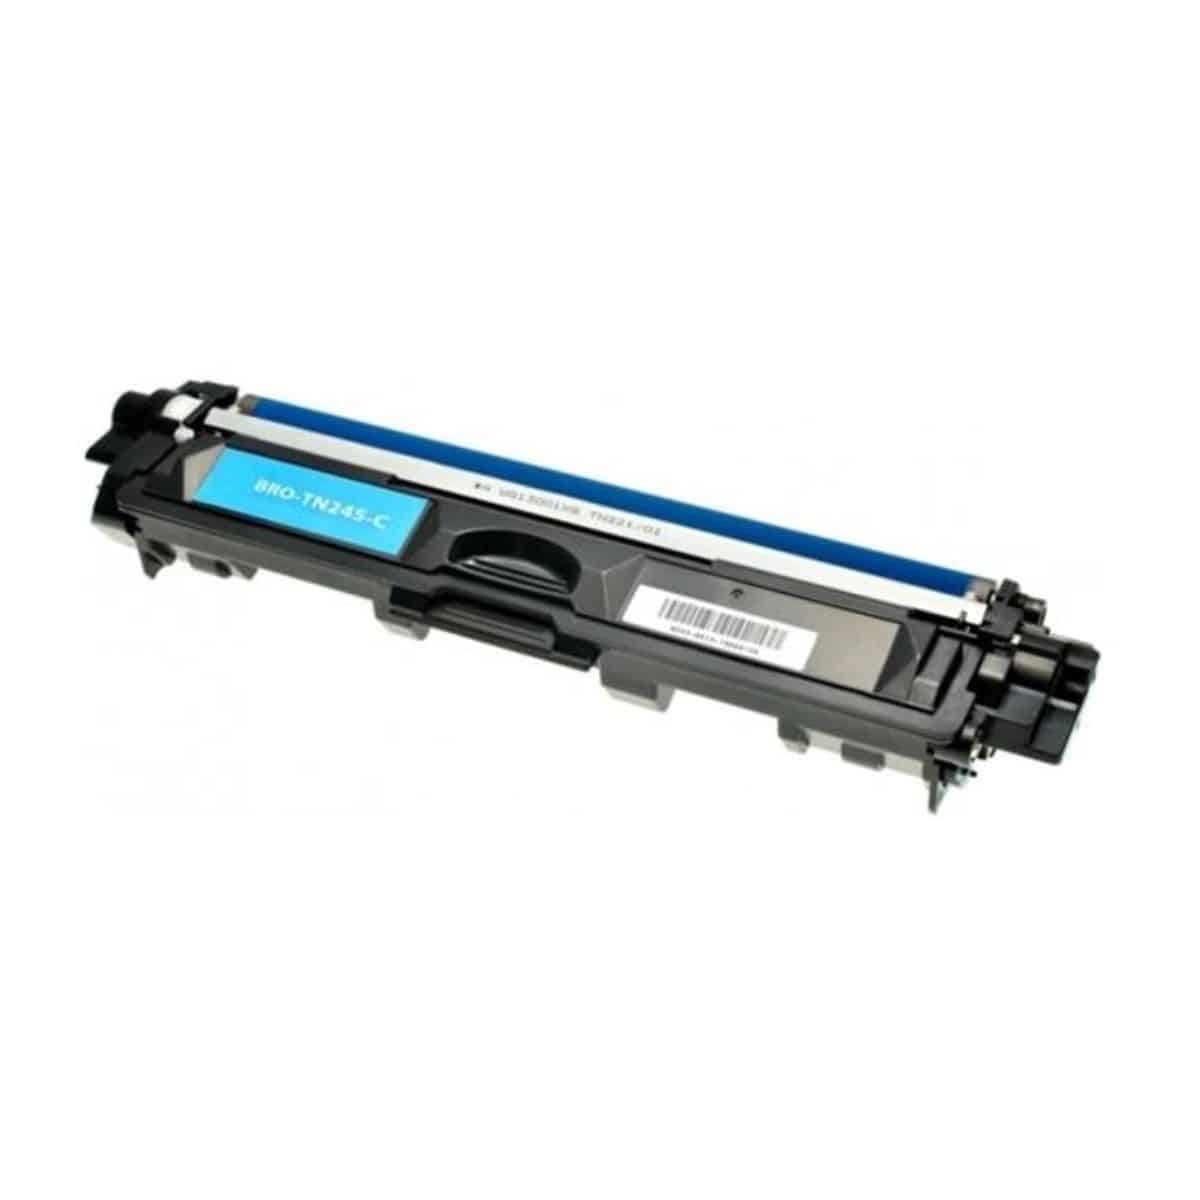 TN-245 C Toner laser compatible Brother - Cyan